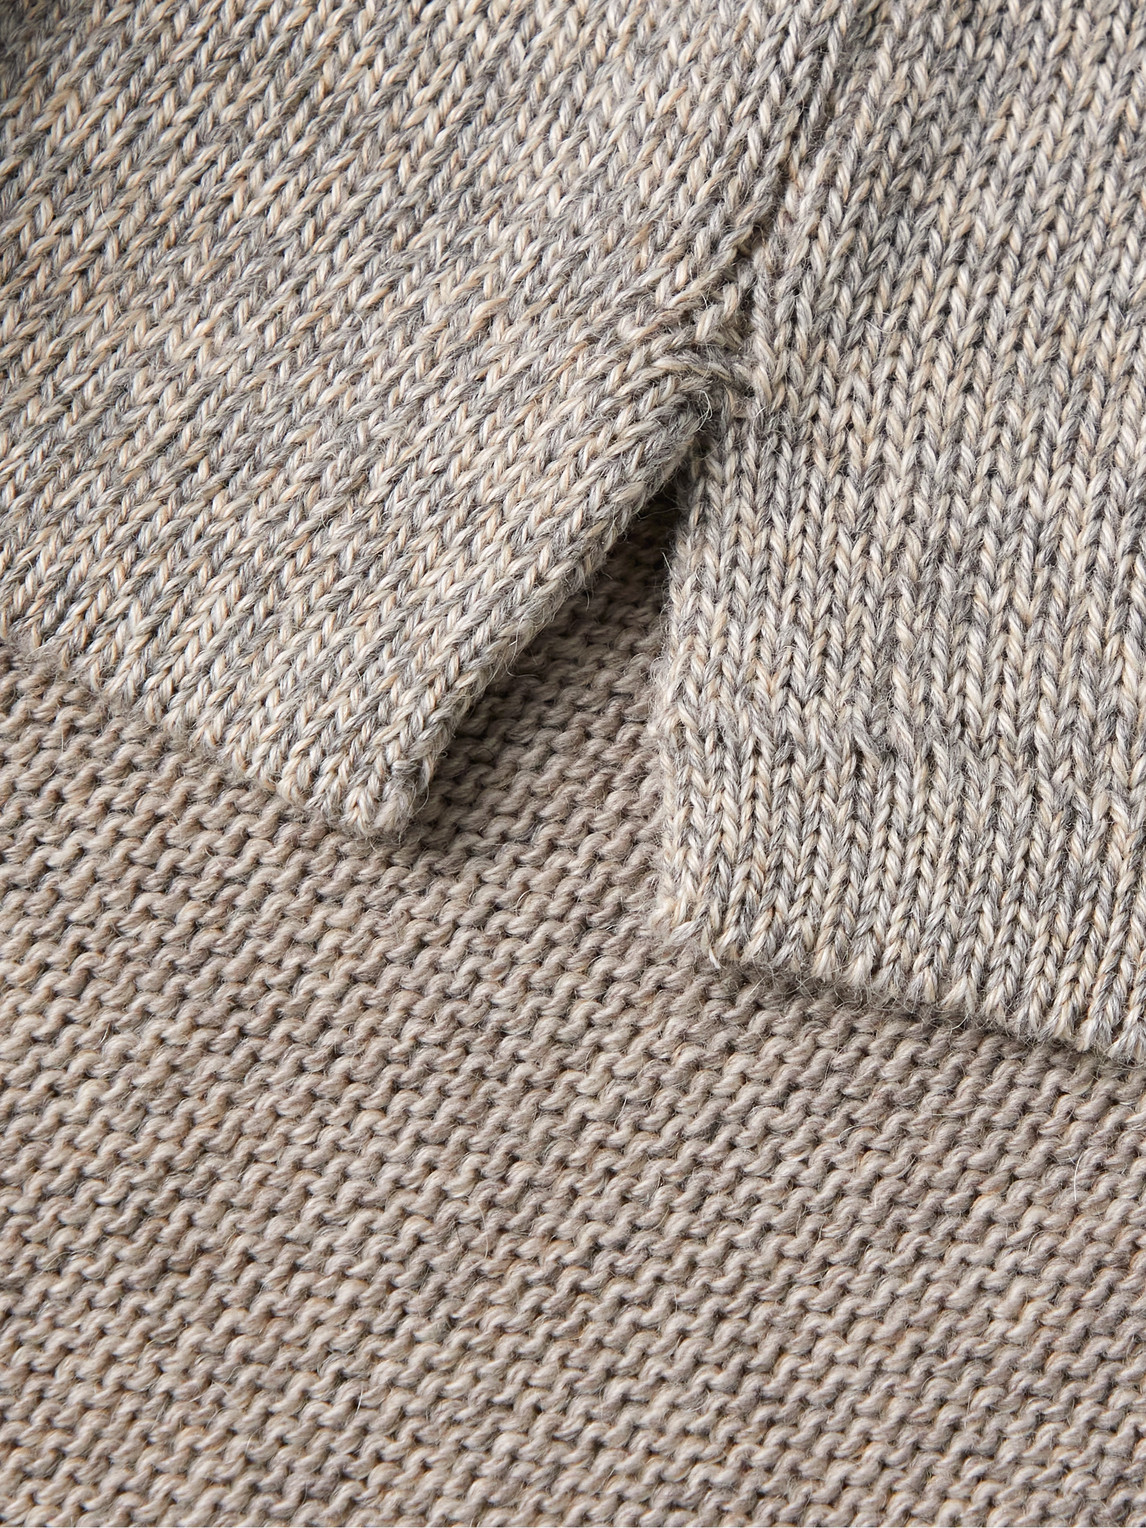 Shop Inis Meain Alpaca, Merino Wool, Cashmere And Silk-blend Cardigan In Gray